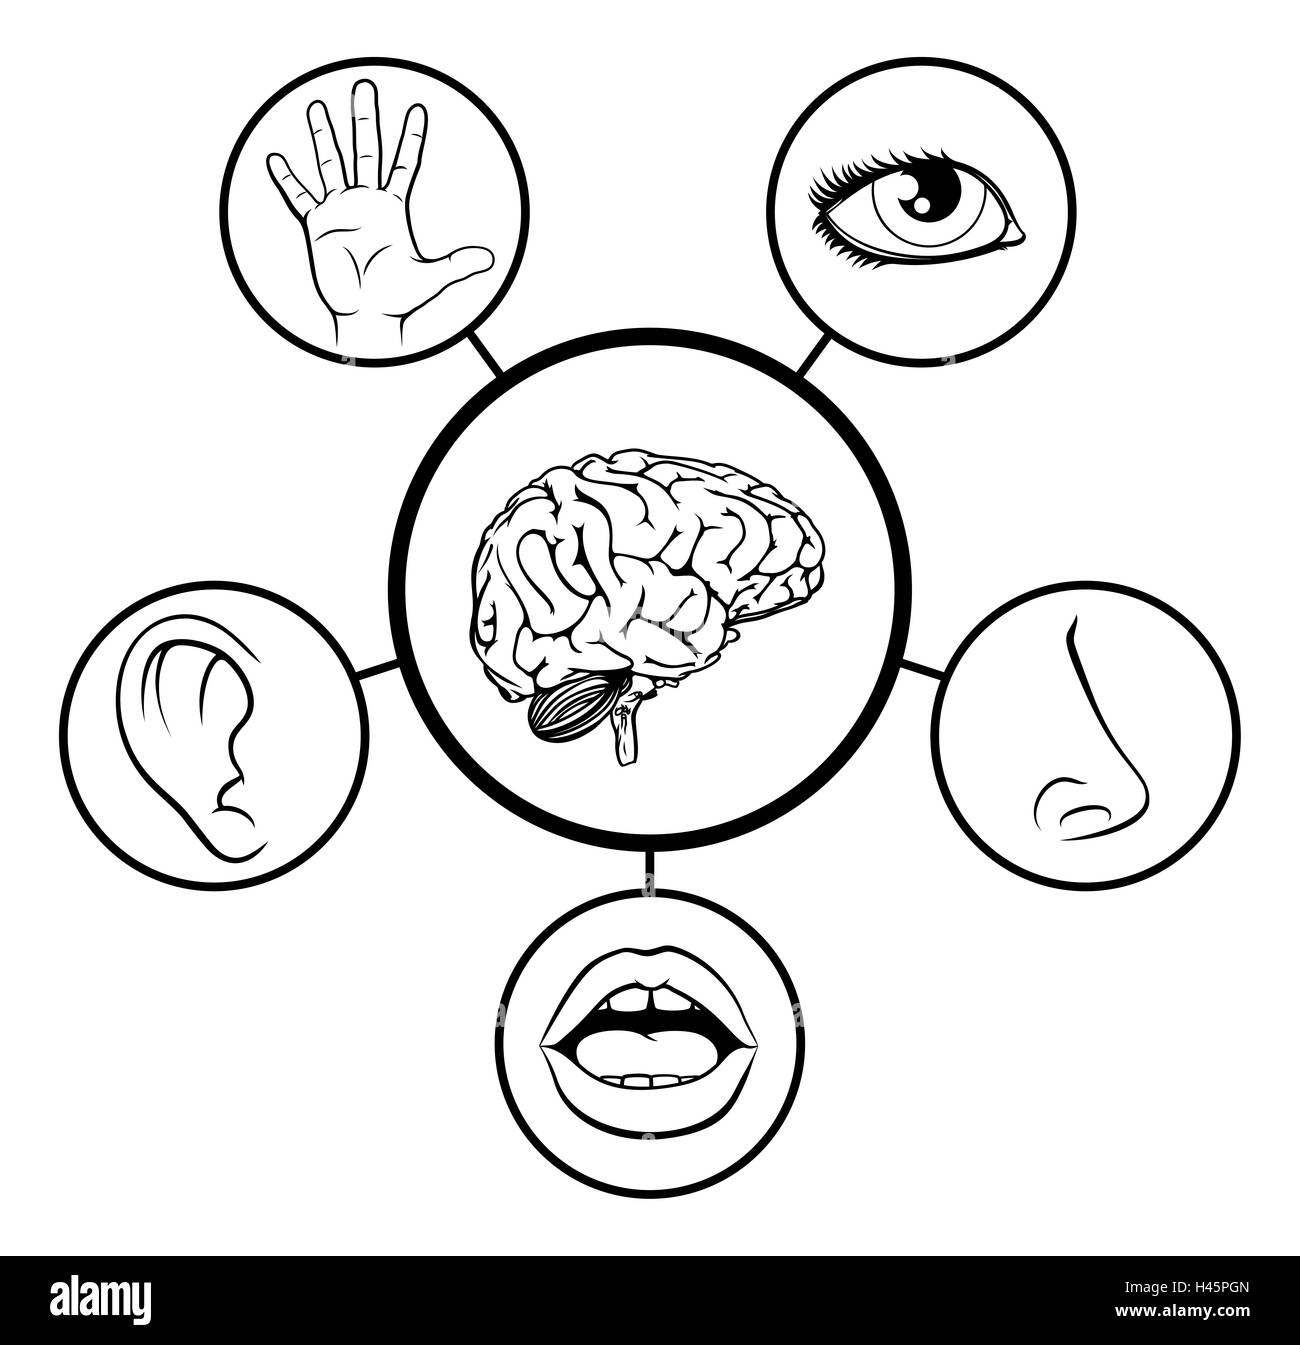 A science education illustration of icons representing the 5 senses ...